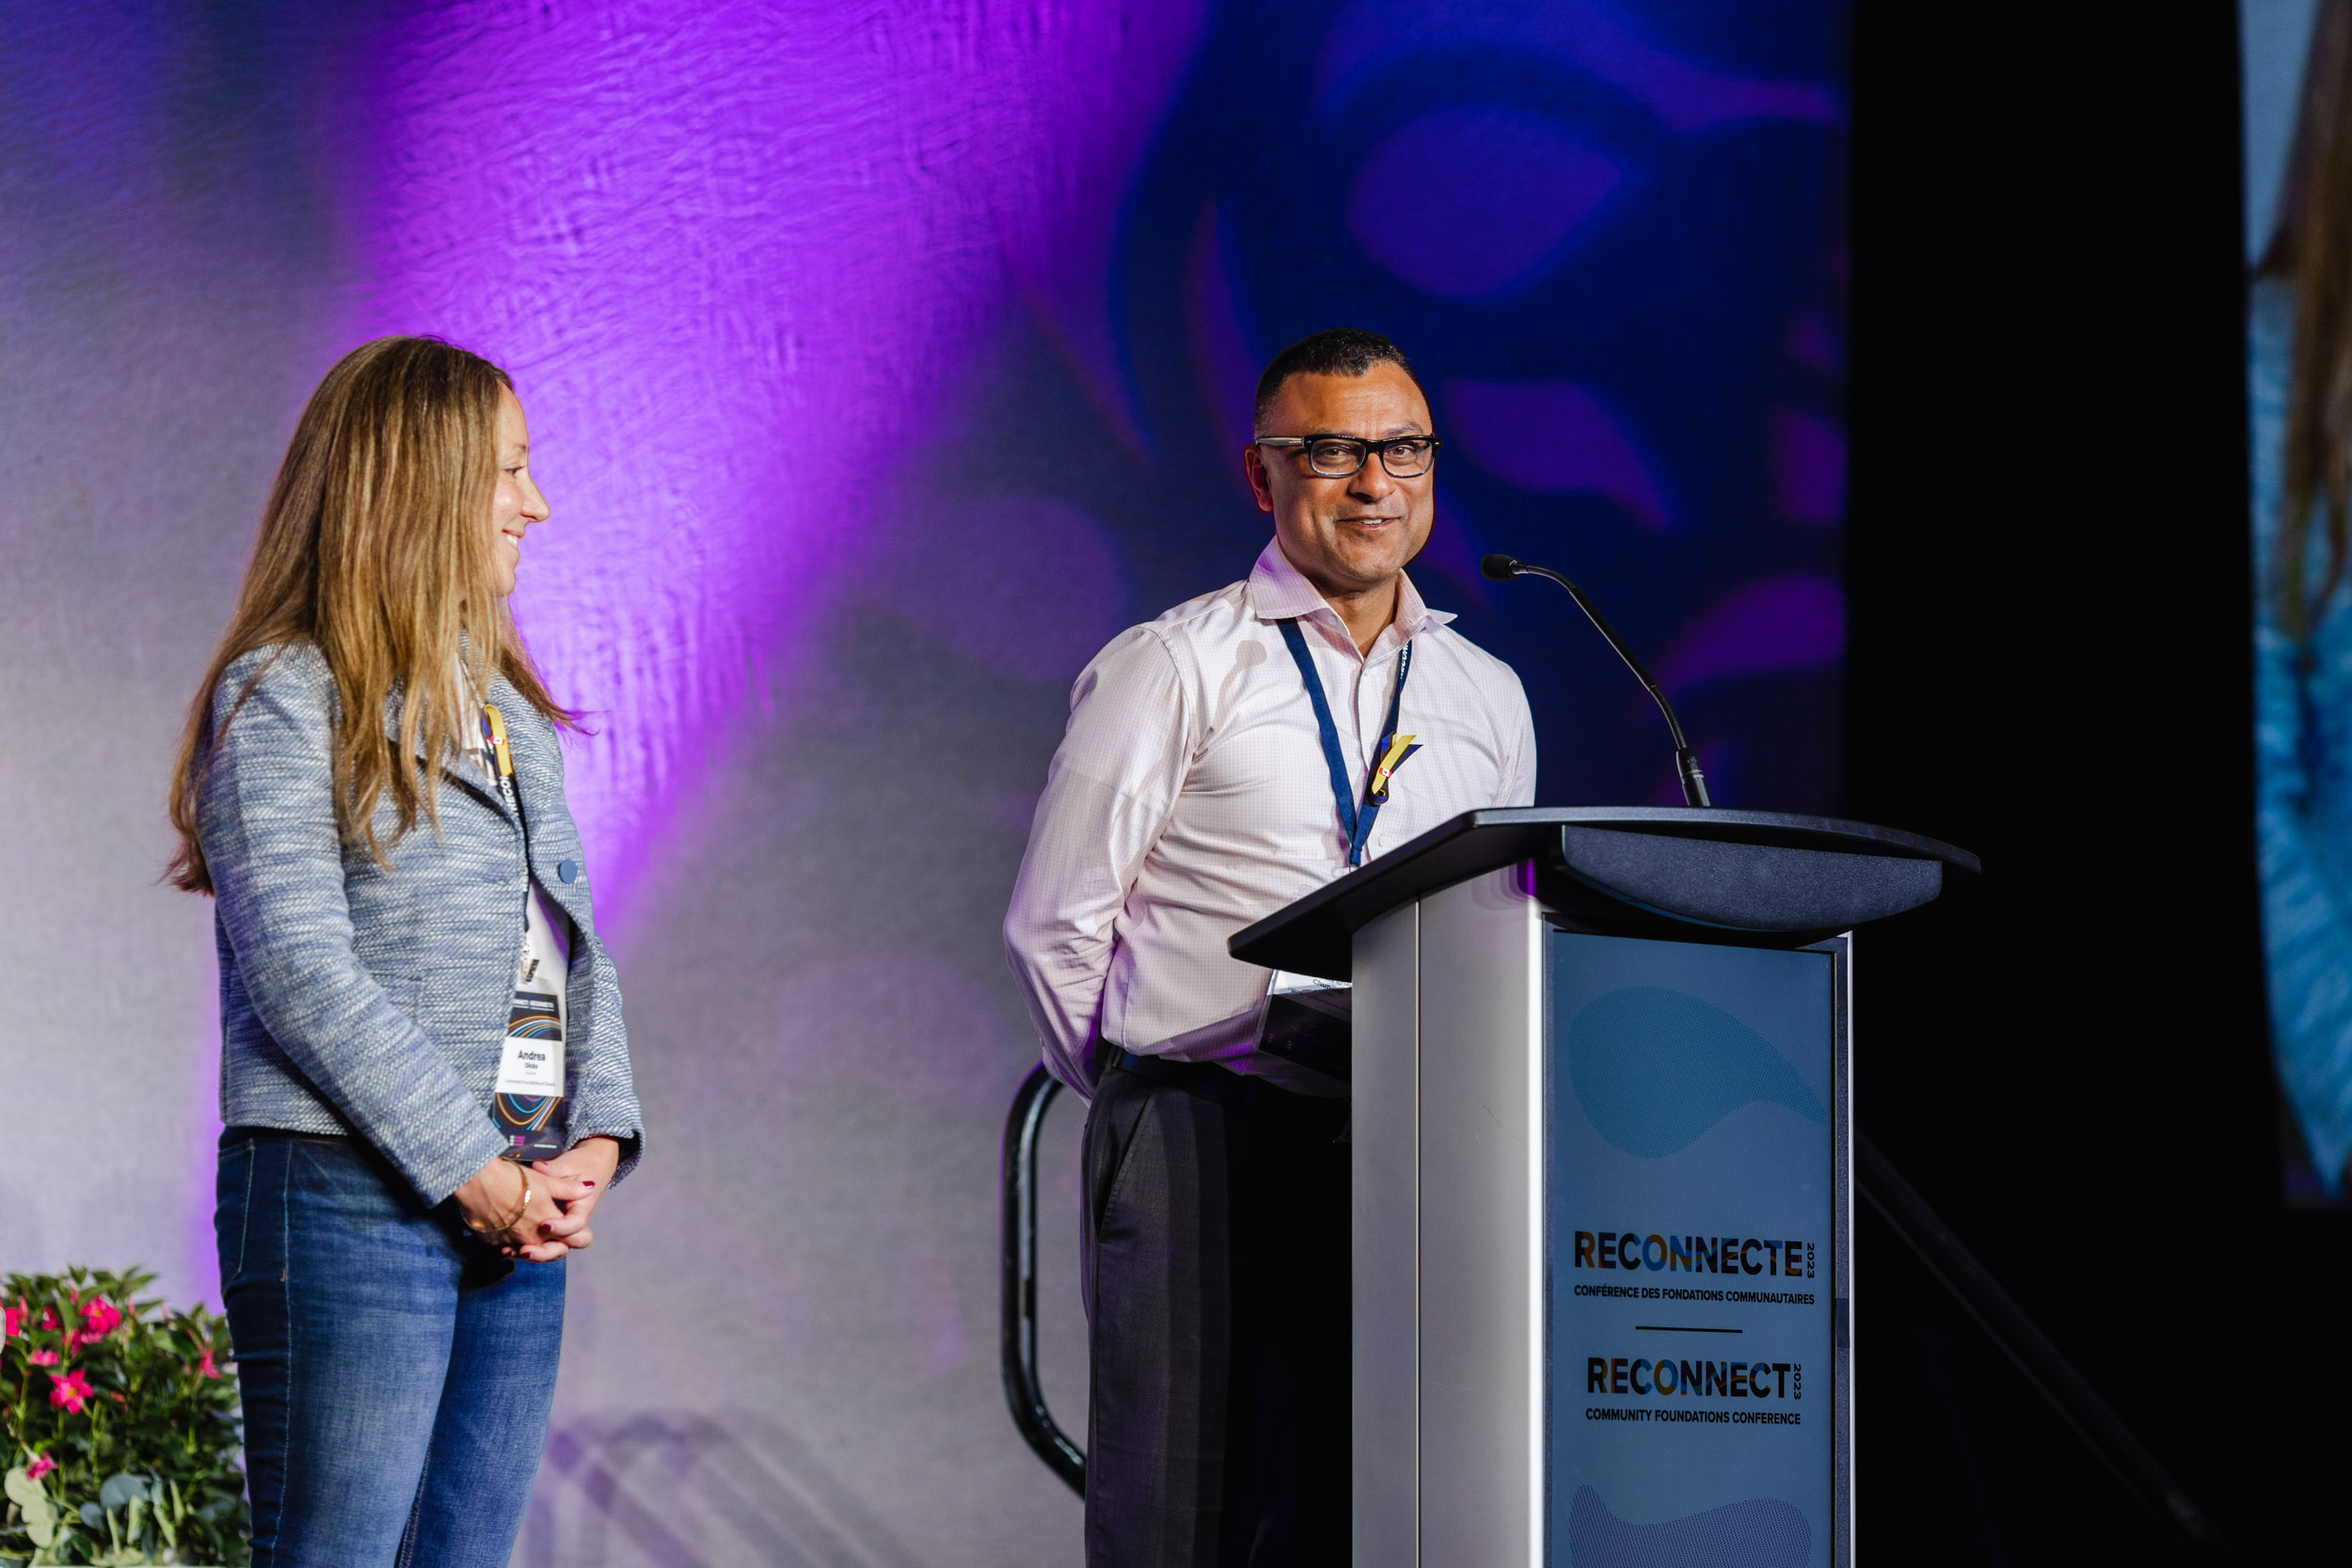 Conference Photography: Two people, one man and one woman, standing at a podium.